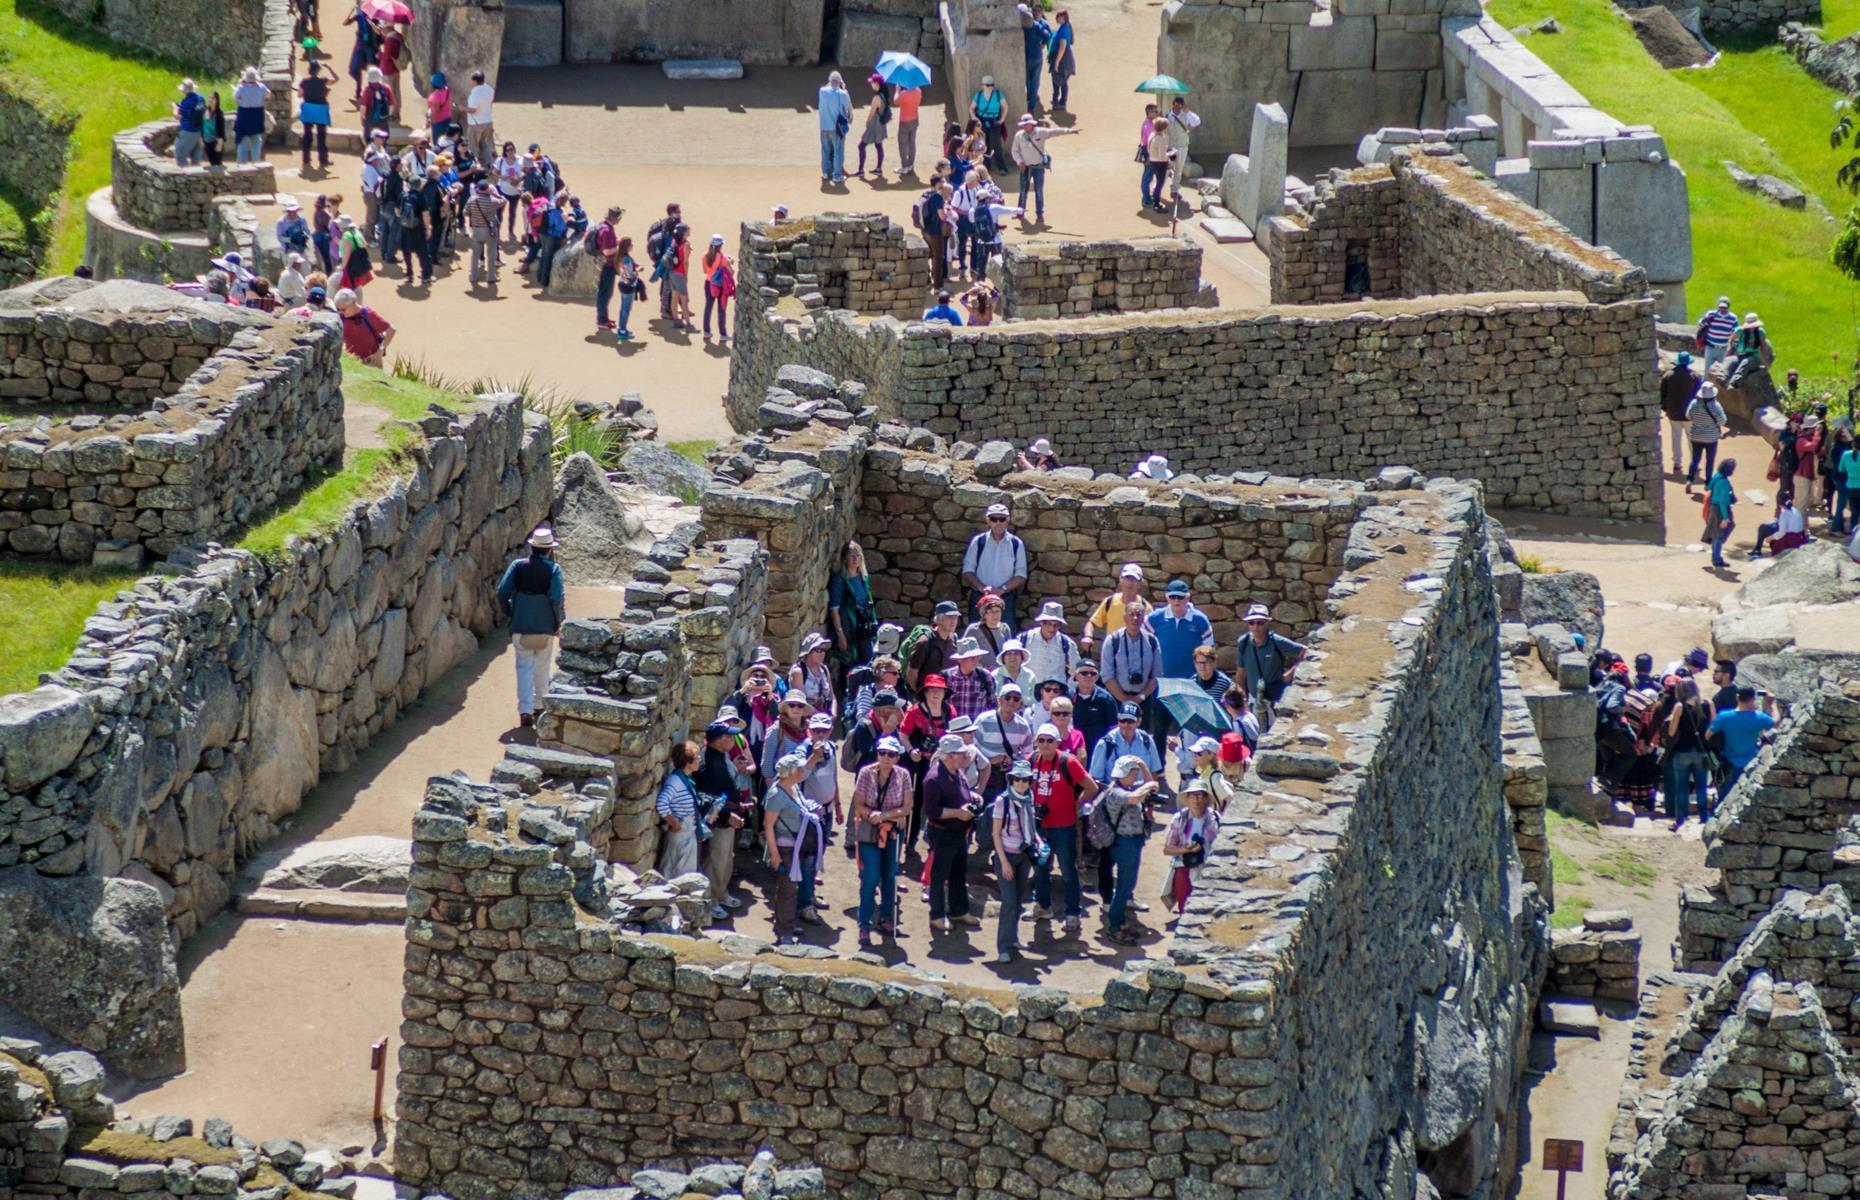 Peruvian tourism authorities have since restricted access to the ancient wonder in a bid to reduce the flow, and now 2,500 people per day are allowed to enter the magnificent Inca citadel in the clouds. The site also allows a maximum of 10 people per guide and re-entry is prohibited. However, that’s still double the amount of people the precious site was intended for.